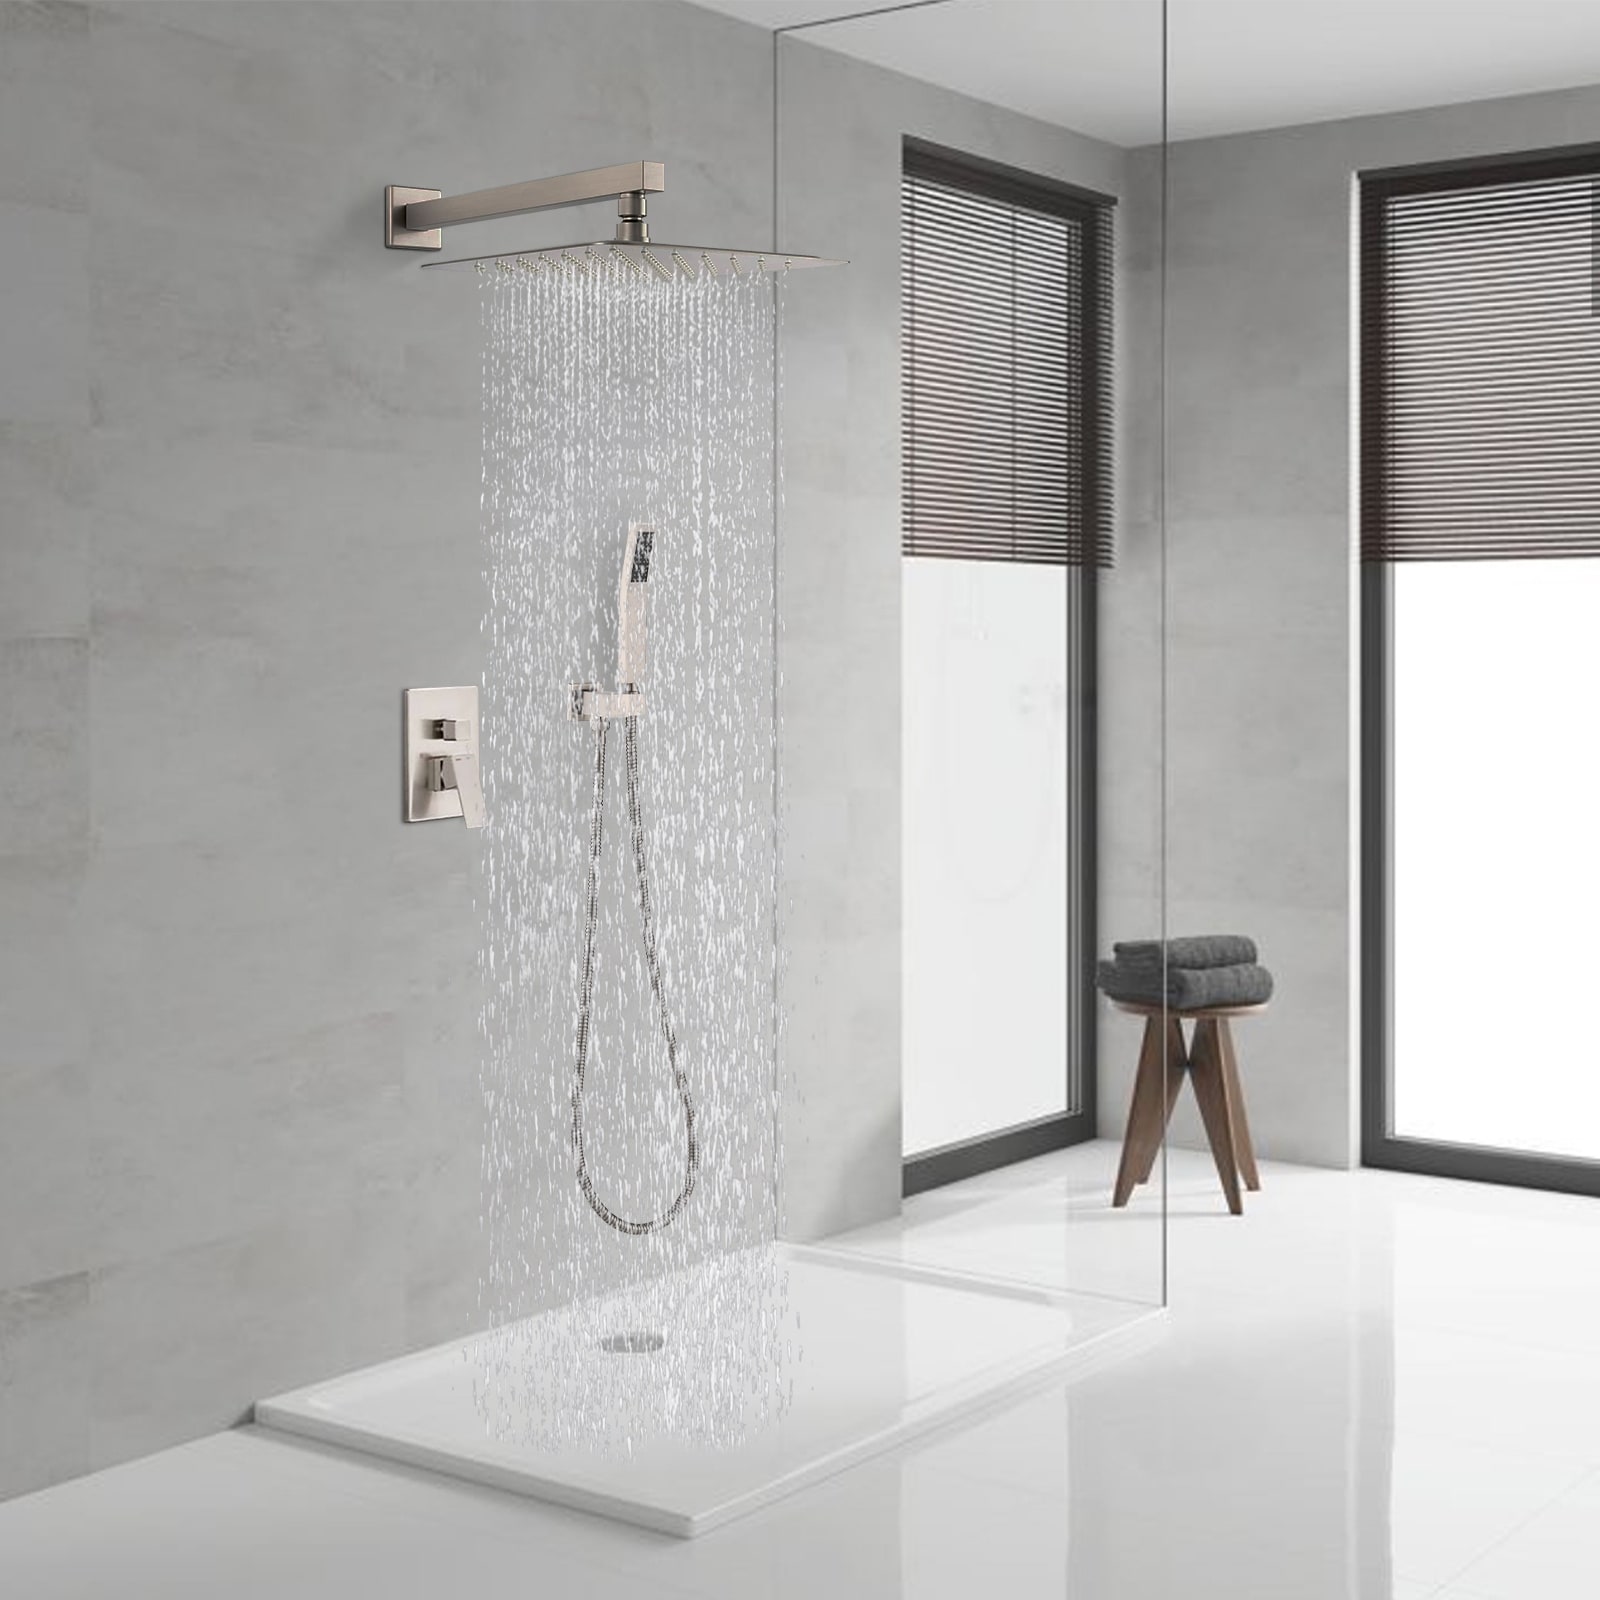 12 Wall Mount Luxury Thermostatic Shower System with Digital Display